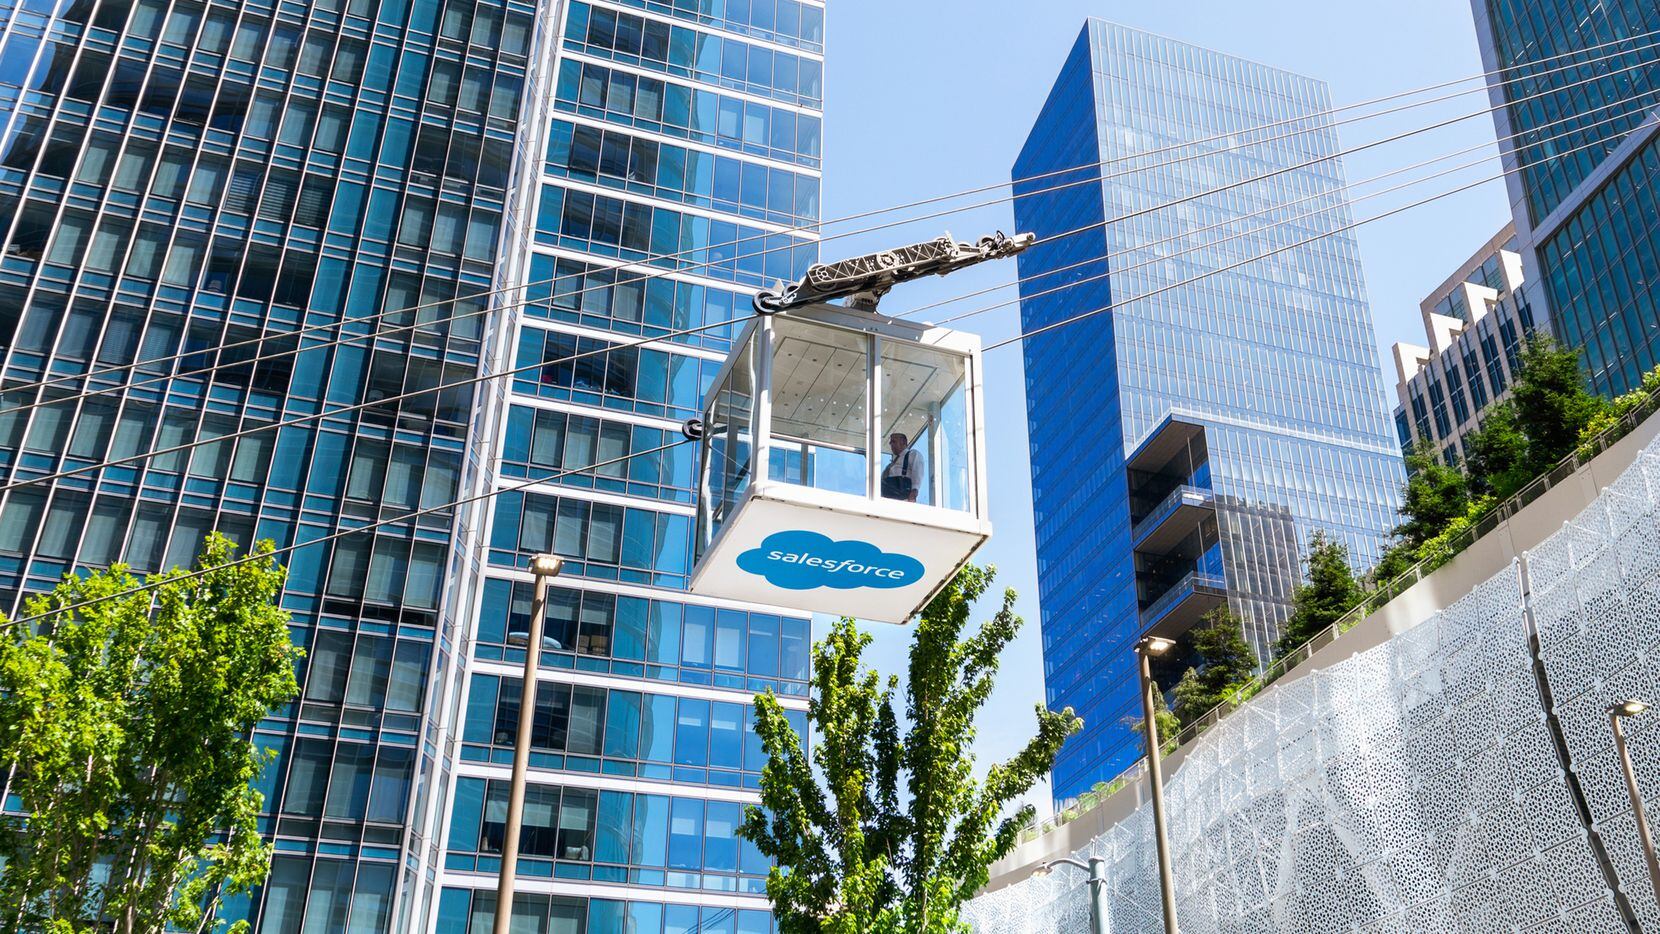 Salesforce is based in San Francisco, where the company has a 25-year sponsorship for naming...